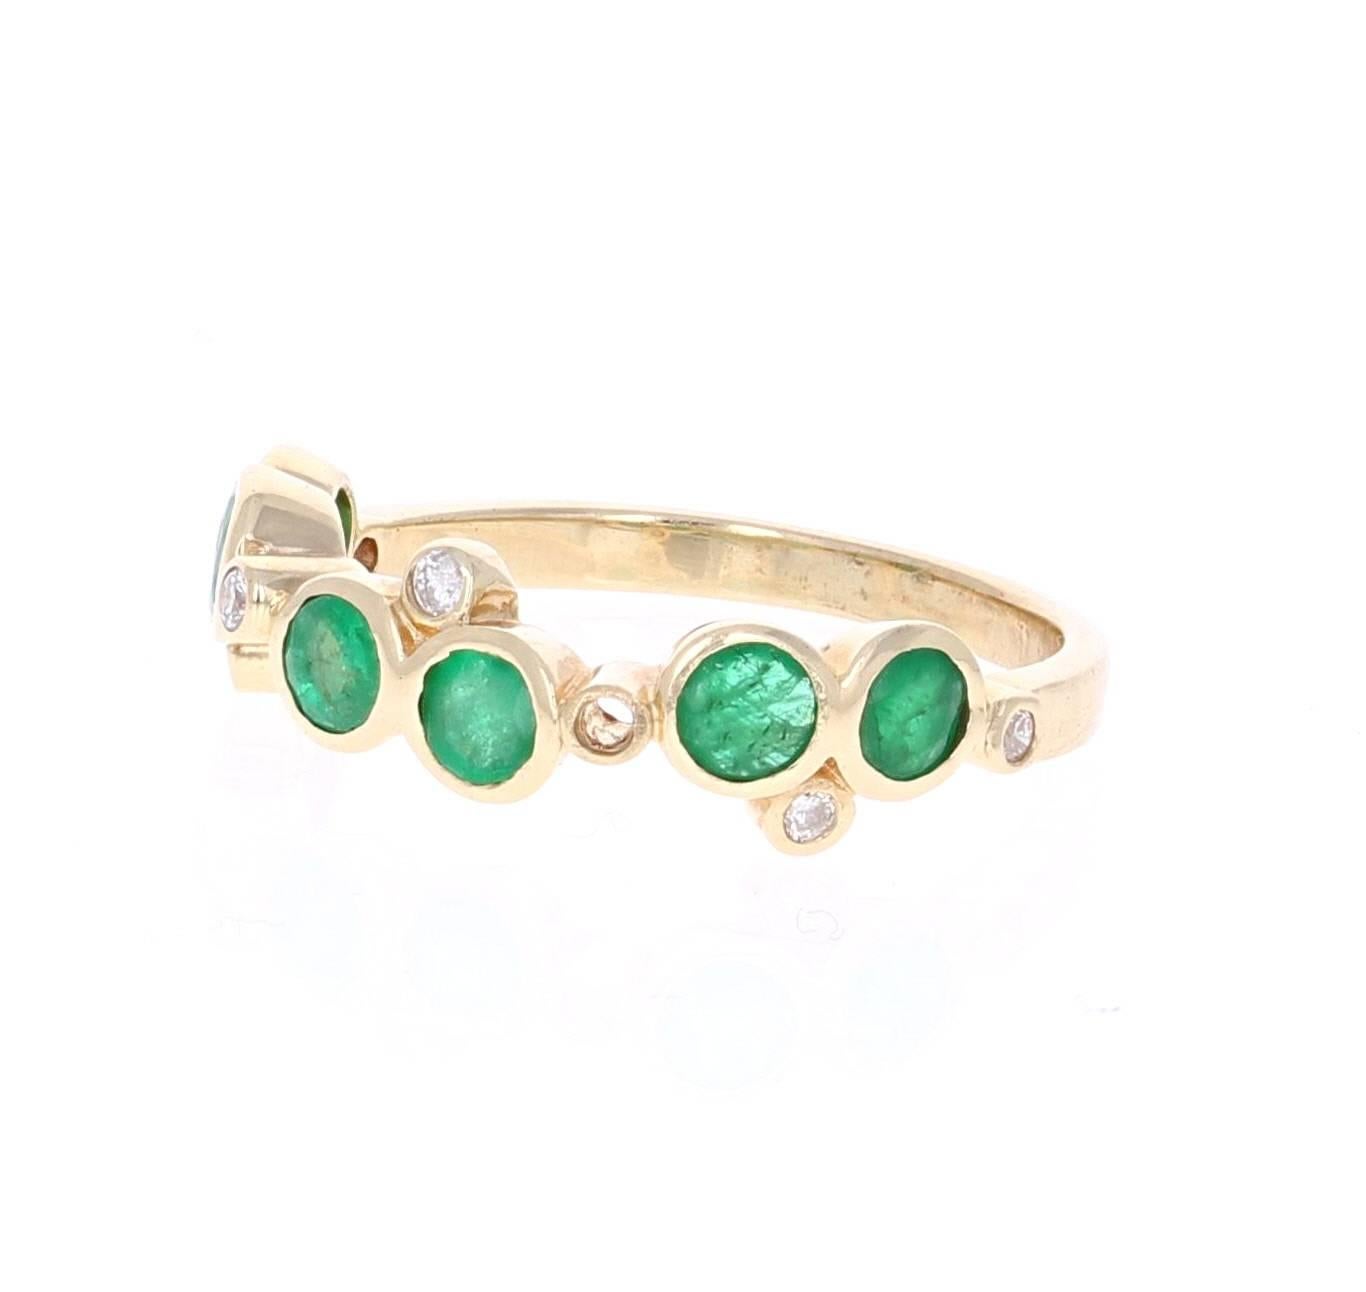 Cute and dainty Emerald and Diamond band that is sure to be a great addition to anyone's accessory collection.   There are 6 Round Cut Emeralds that weigh 0.91 carats and 7 Round Cut Diamonds that weigh 0.10 carats.  The total carat weight of the